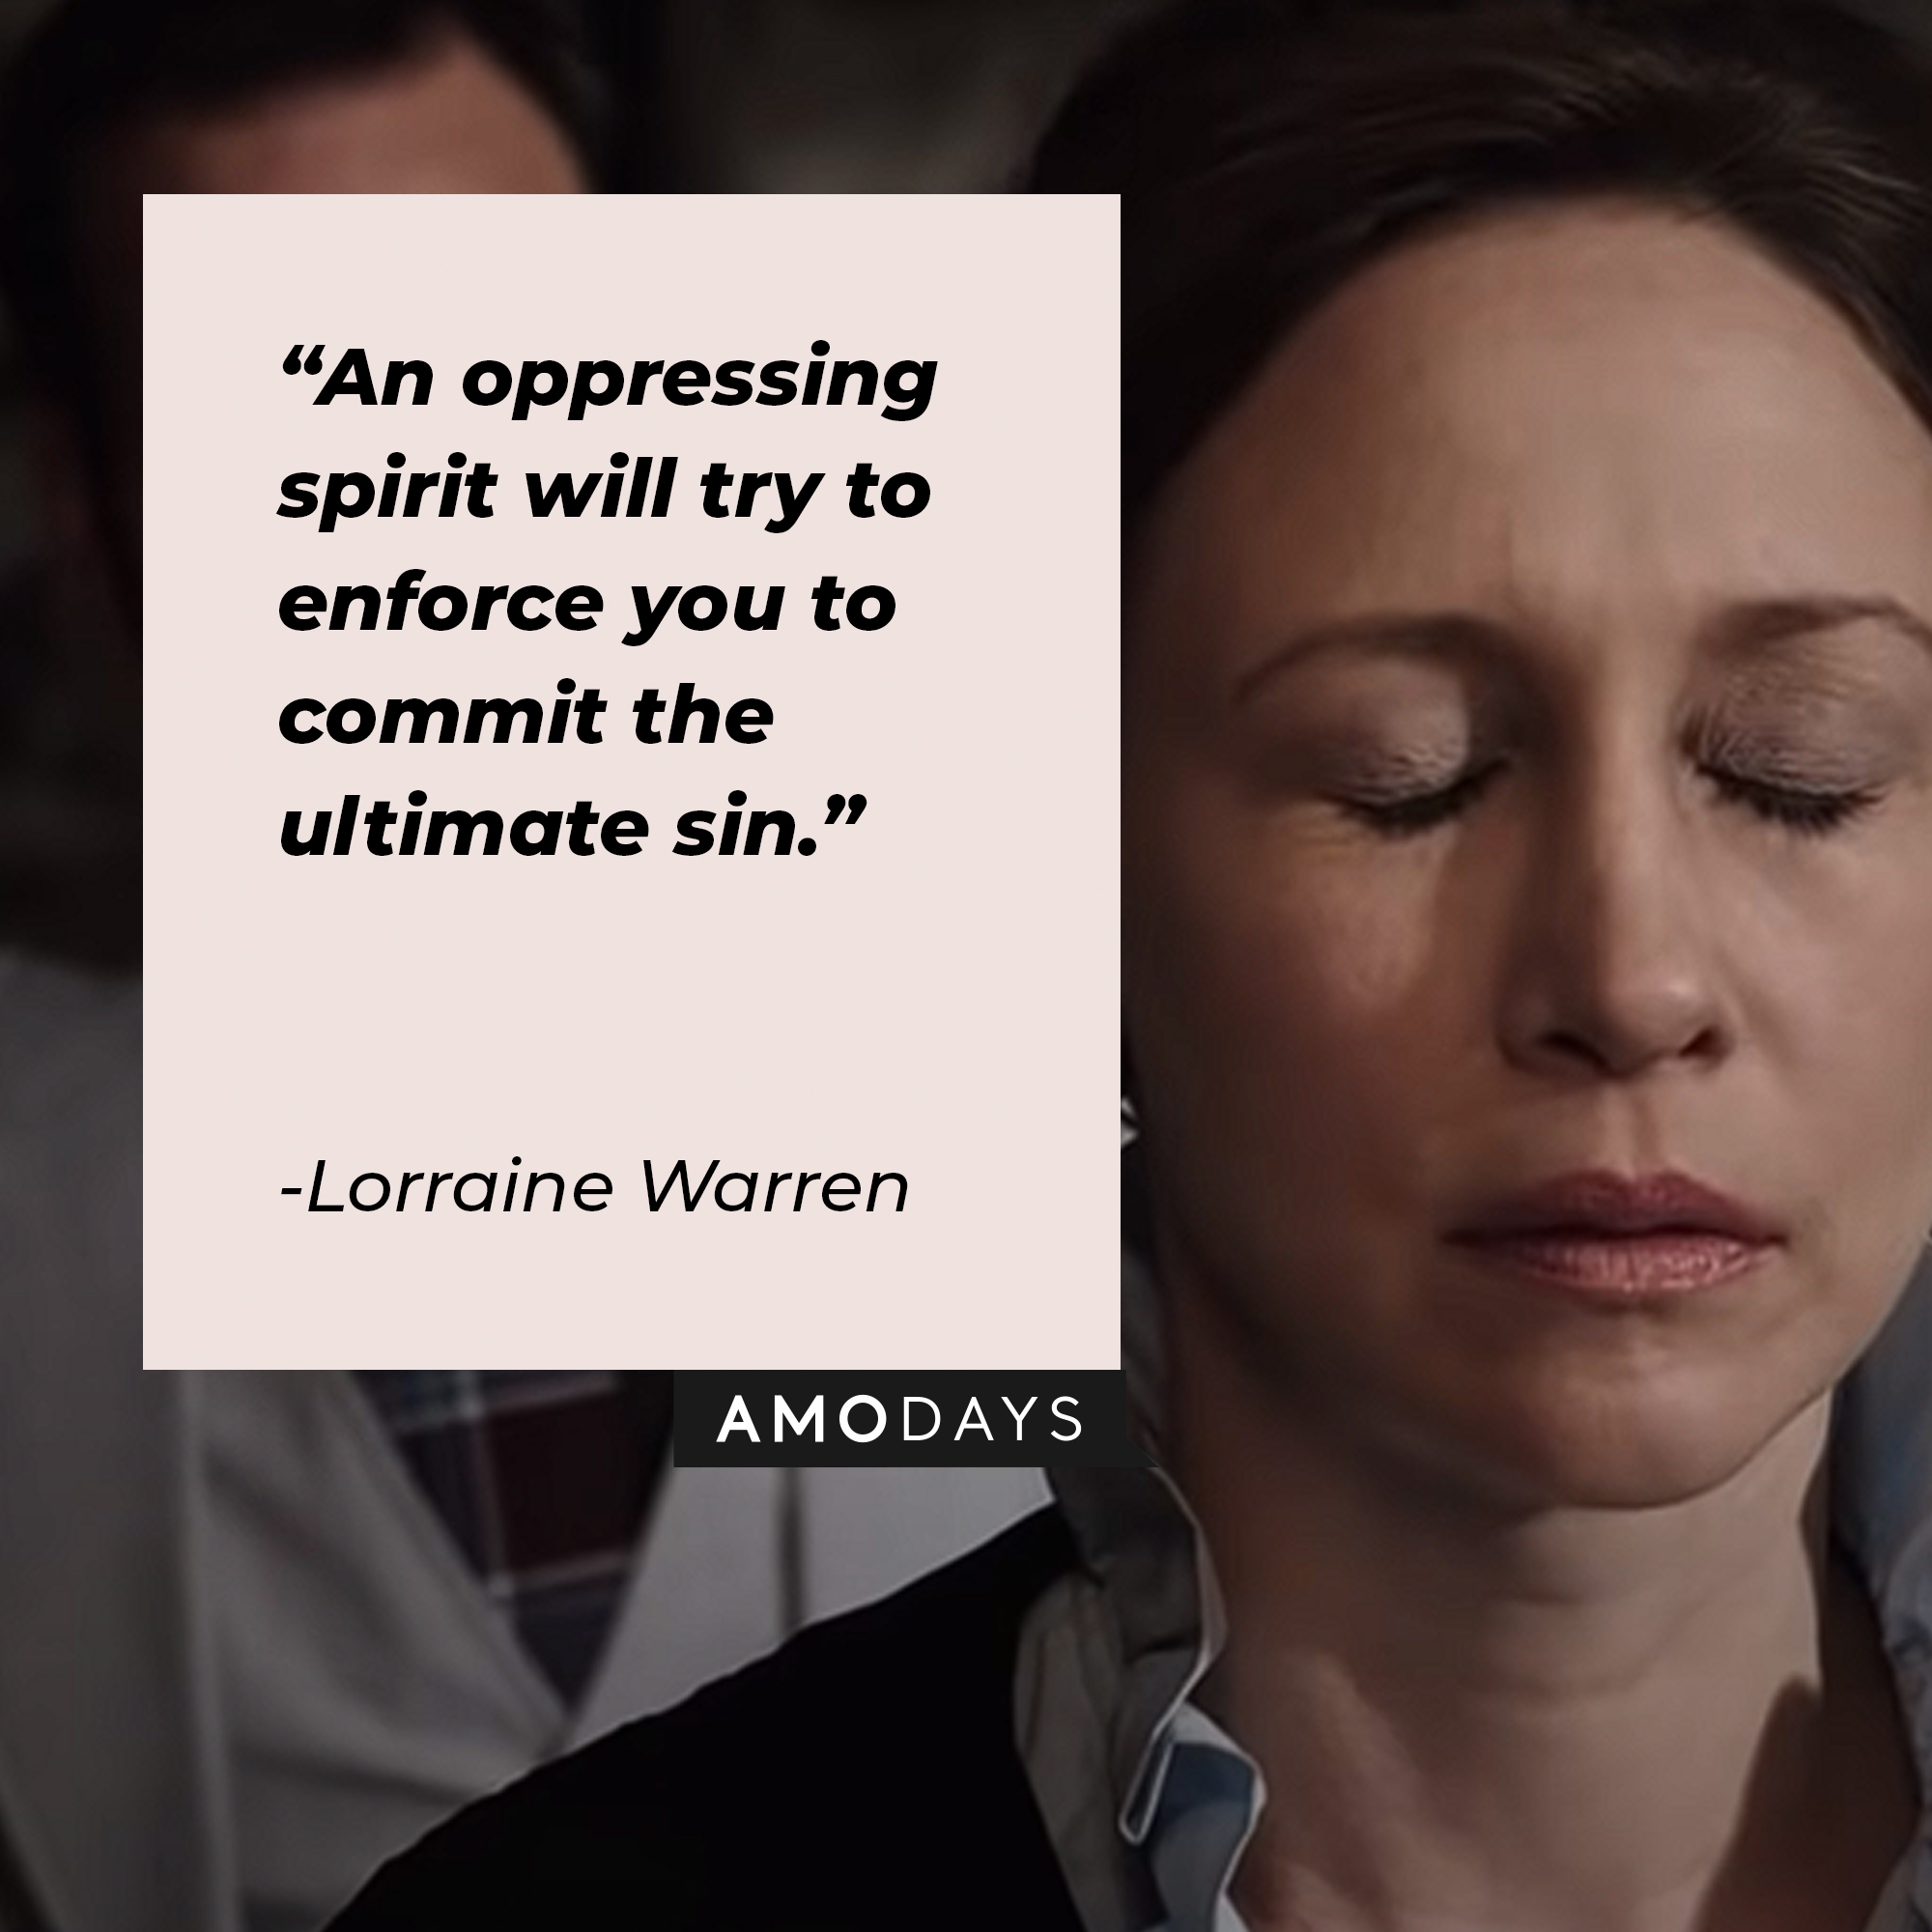 Lorraine Warren's character from the Conjuring franchise with her quote: “An oppressing spirit will try to enforce you to commit the ultimate sin.” | Source: youtube.com/WarnerBrosPictures